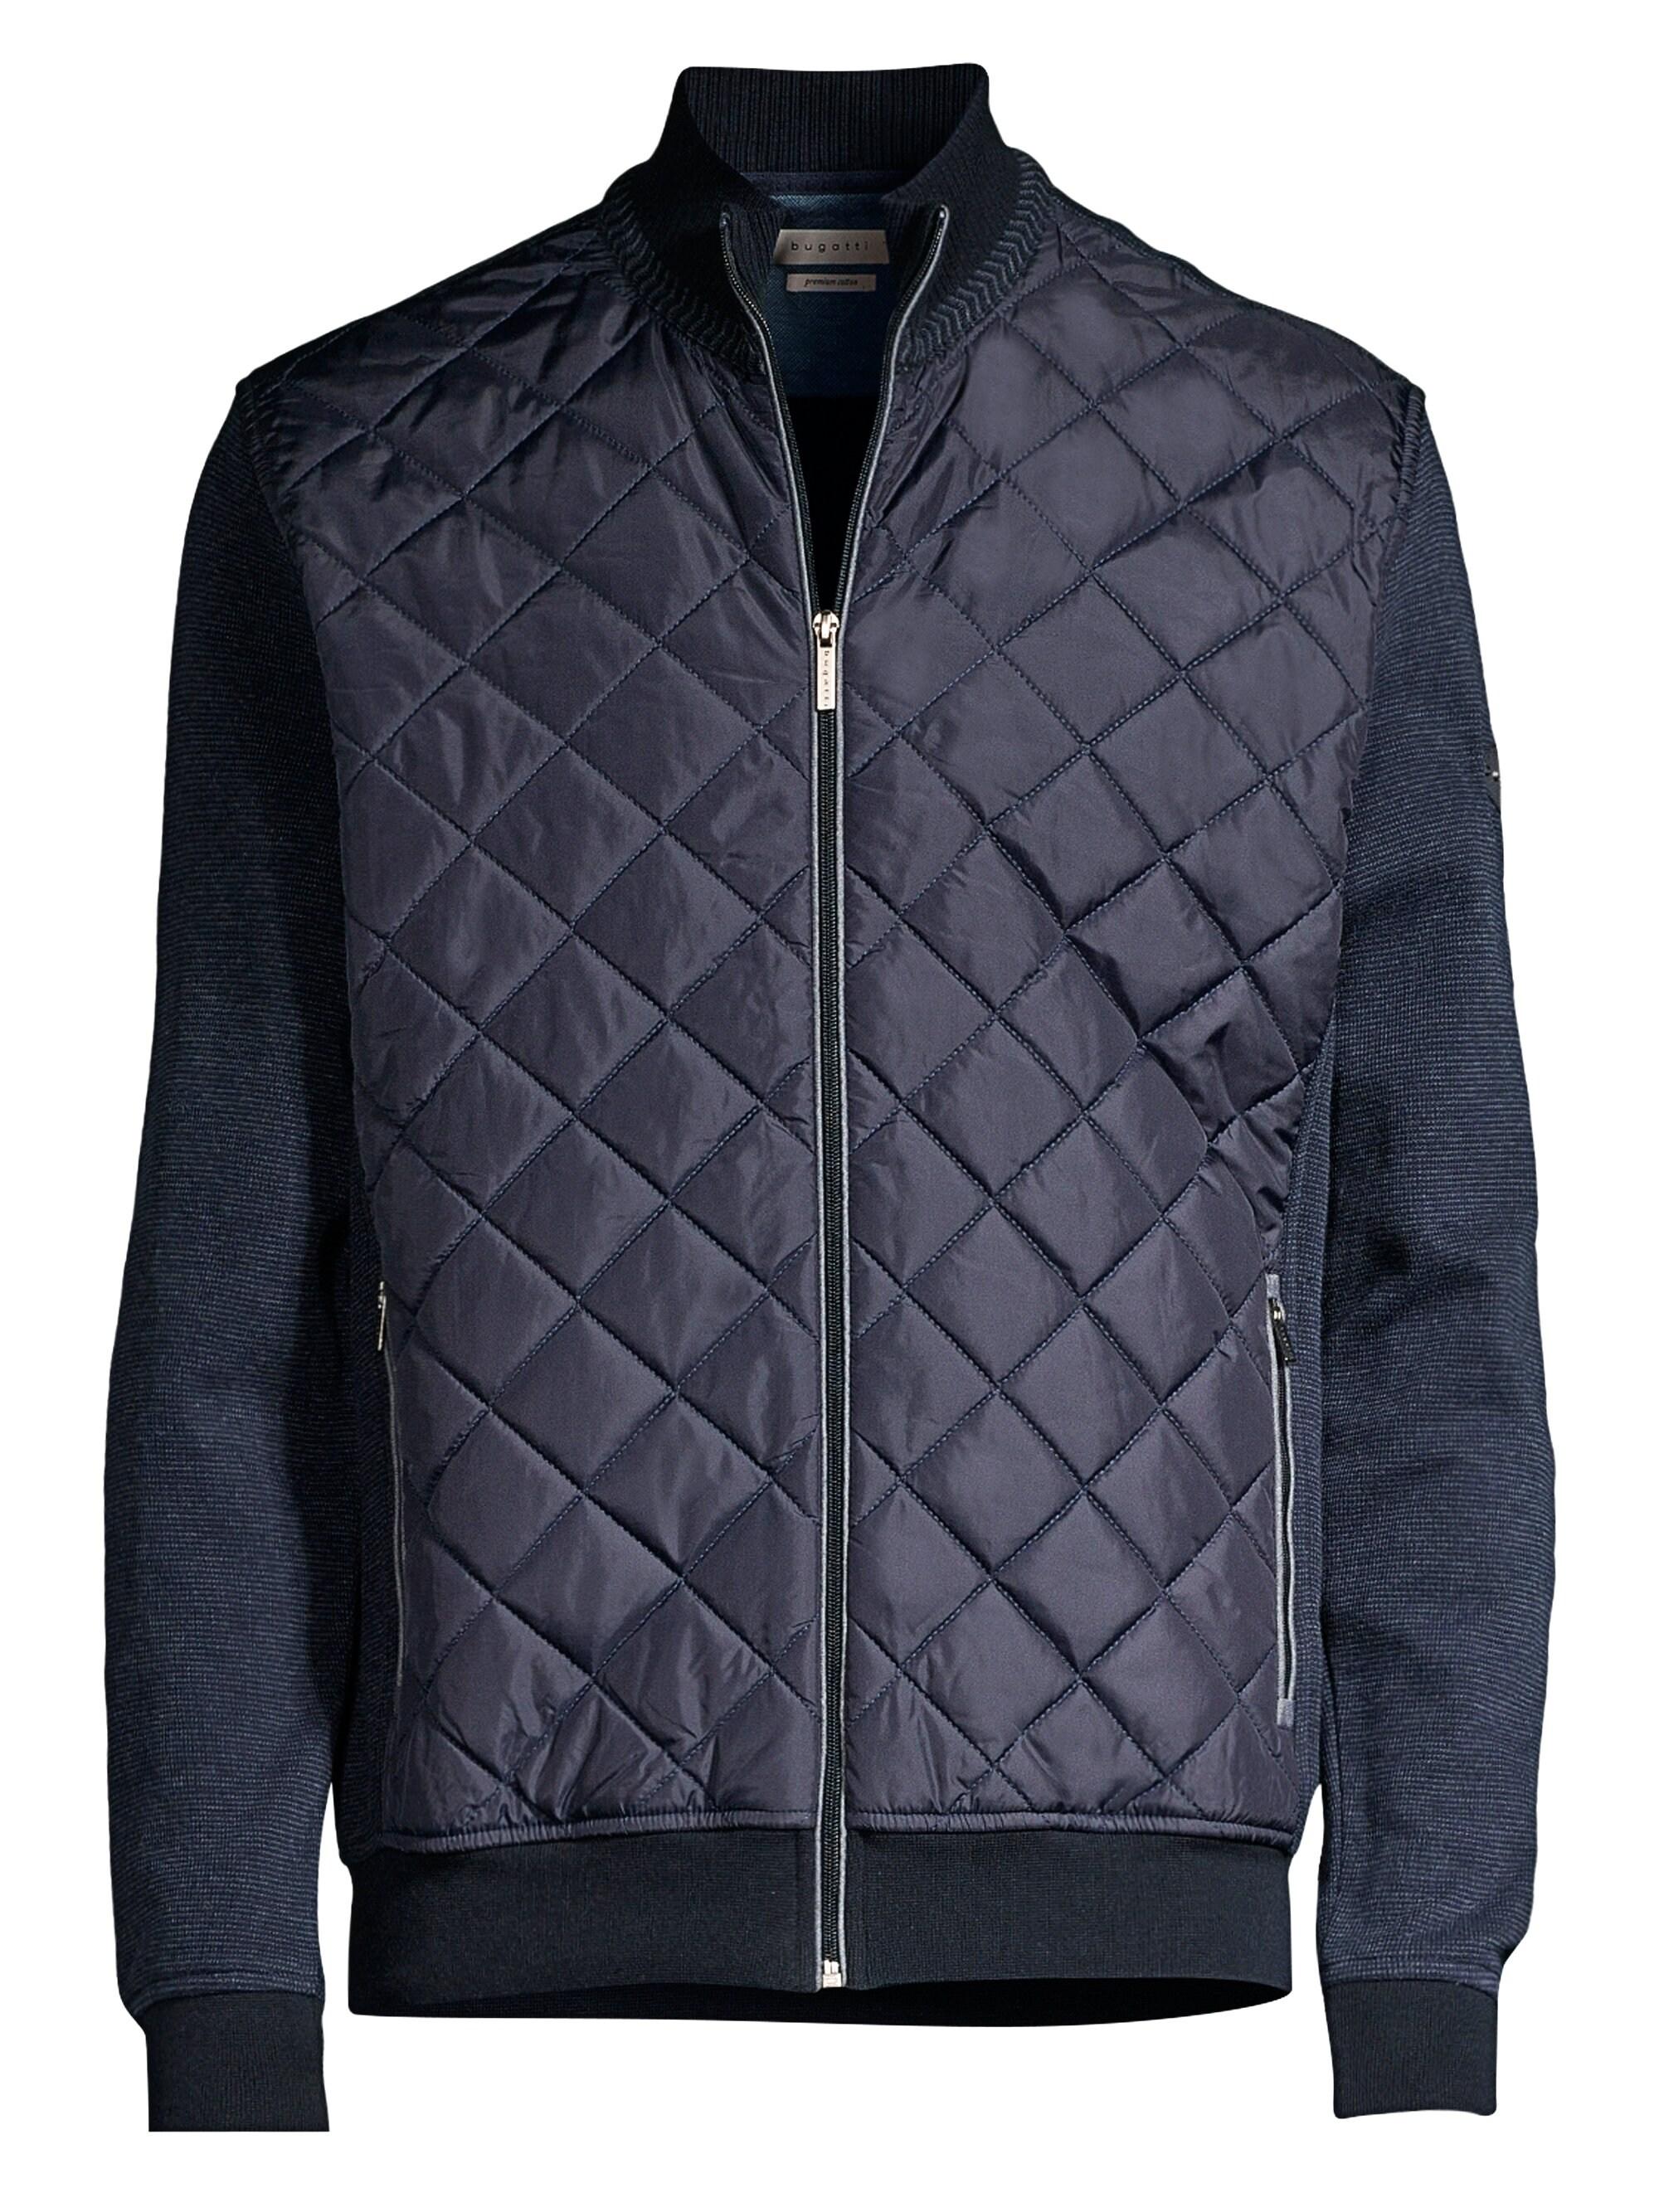 Bugatti Cotton Quilted Full Zip Jacket in Navy (Blue) for Men - Lyst